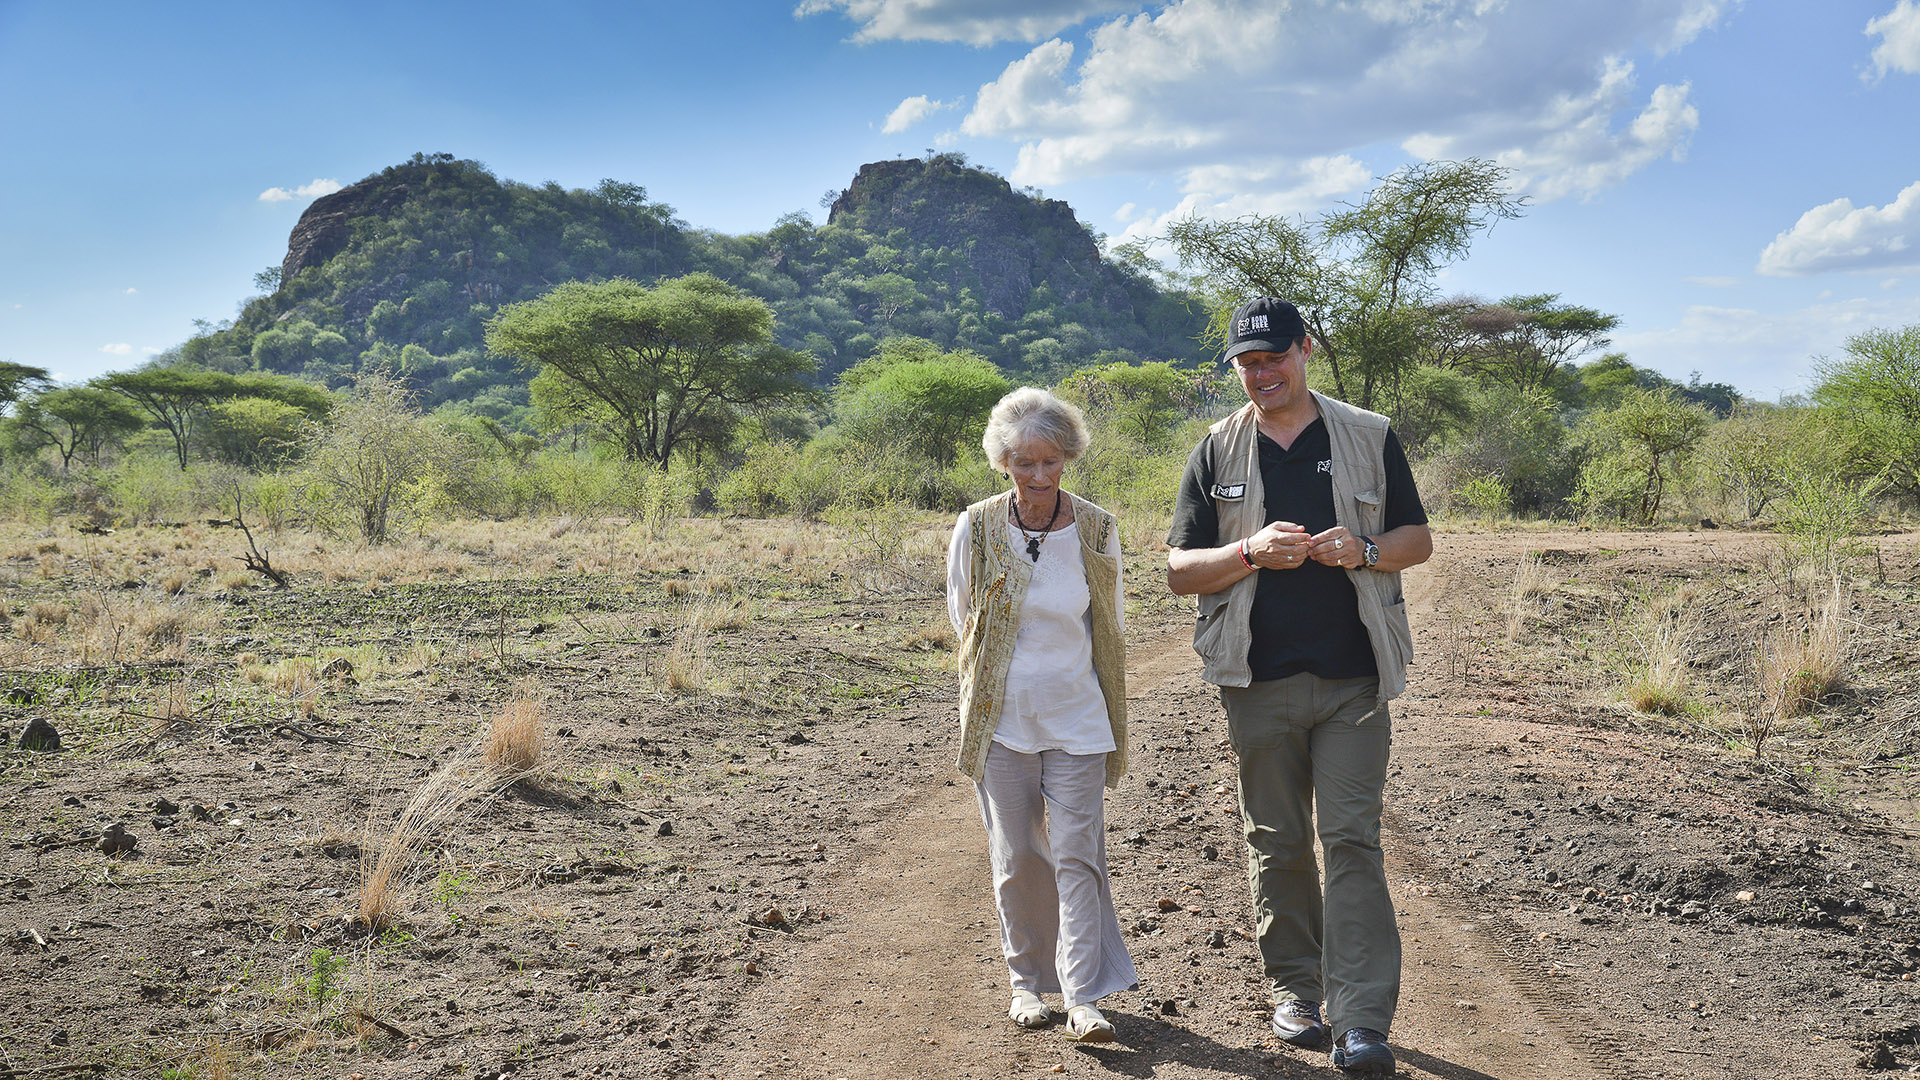 Virginia McKenna and Will Travers walking in front of a mountain